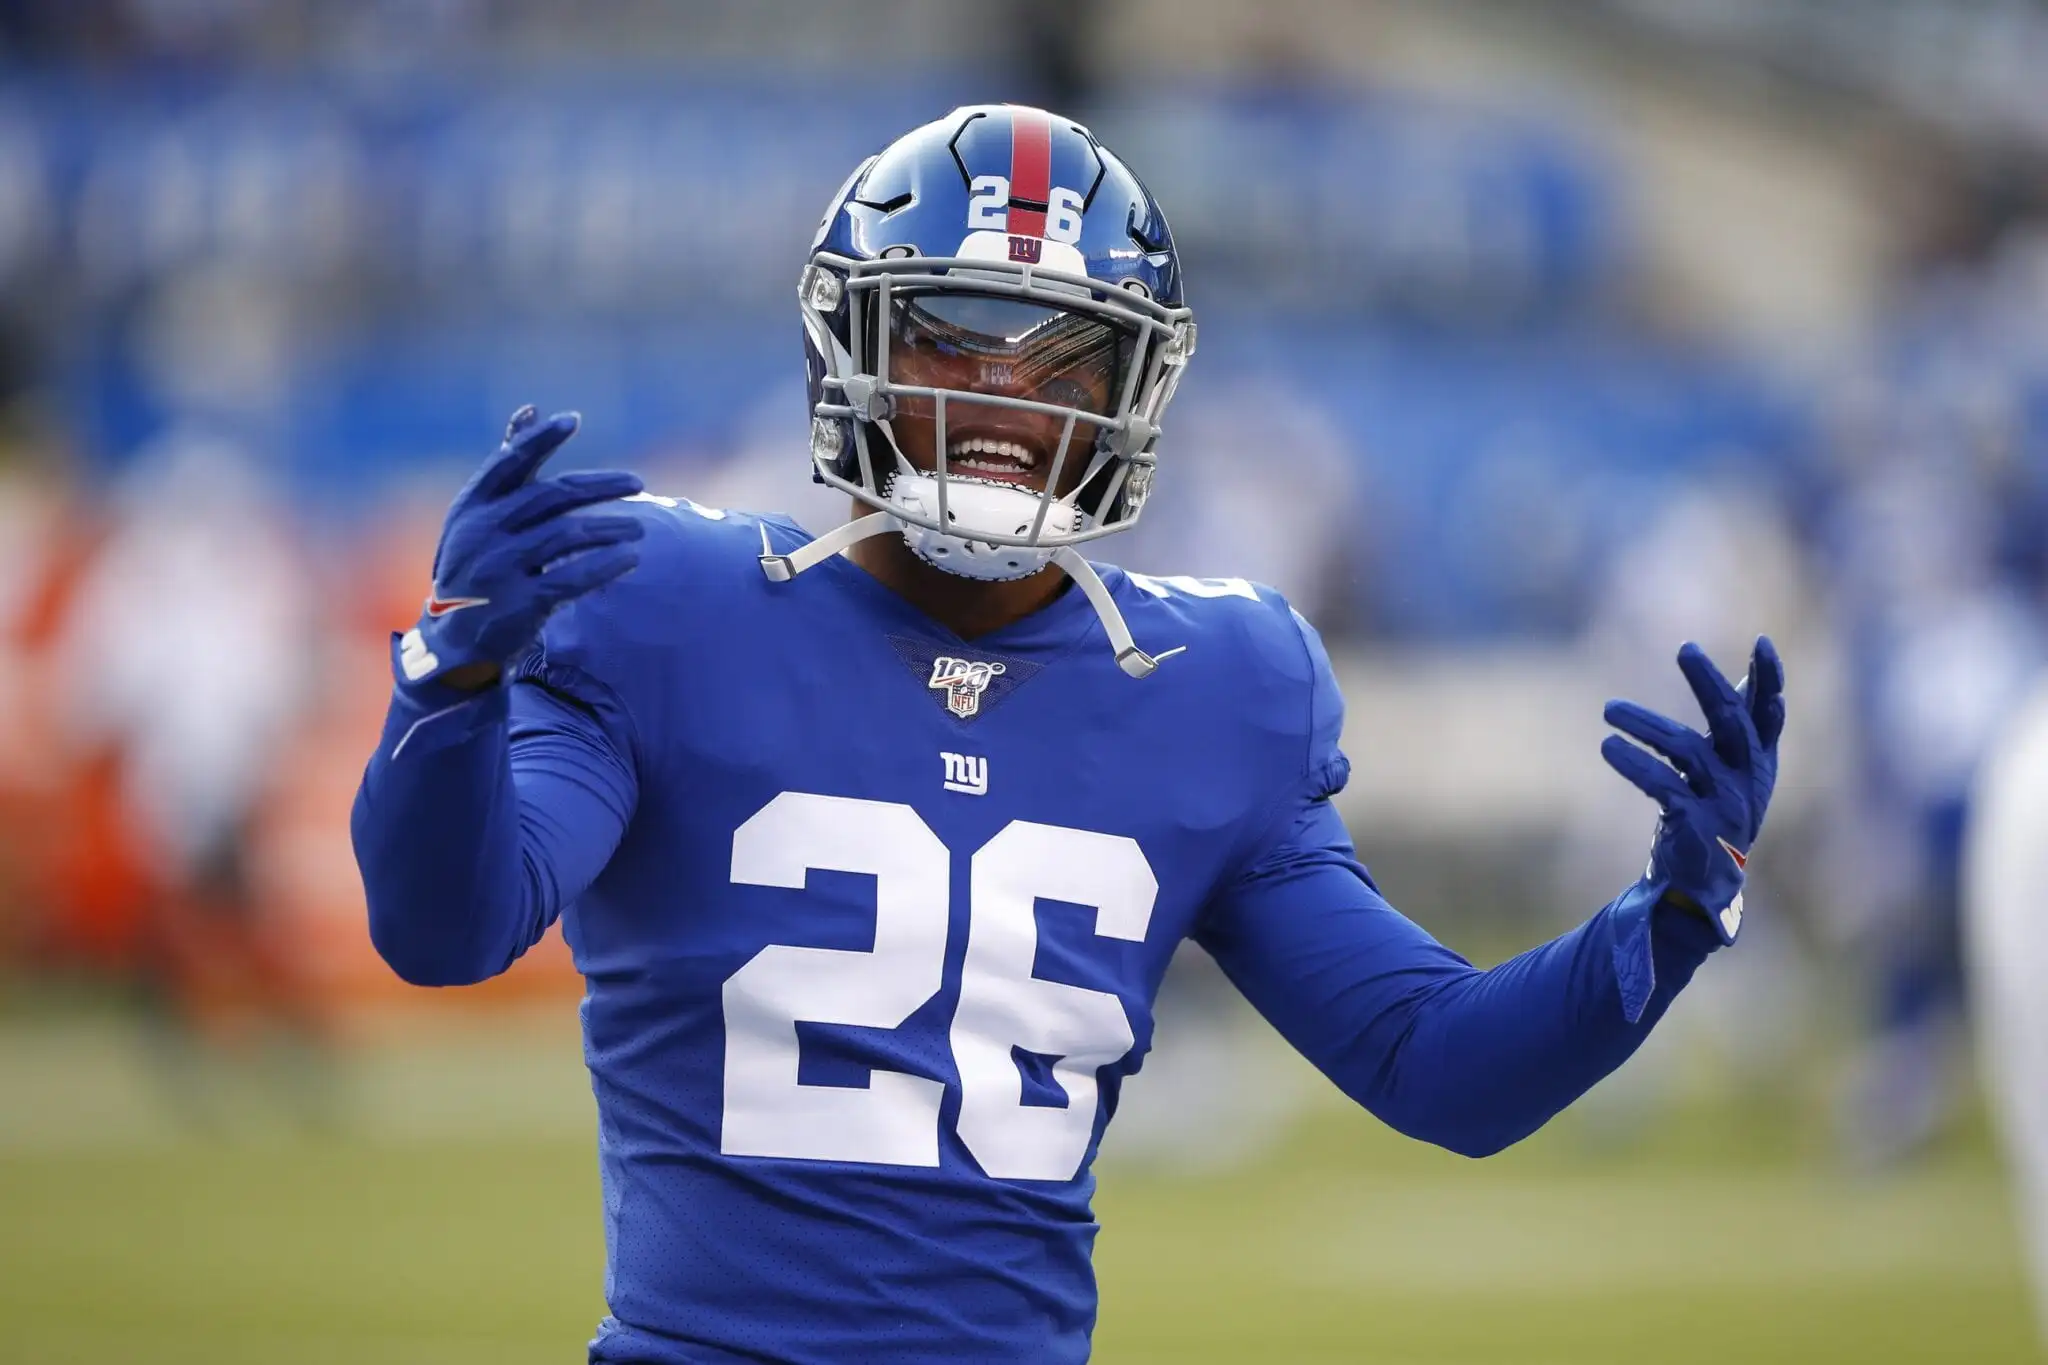 Giants' Dilemma: The Uncertain Future of Saquon Barkley and a Potential Rivalry Twist